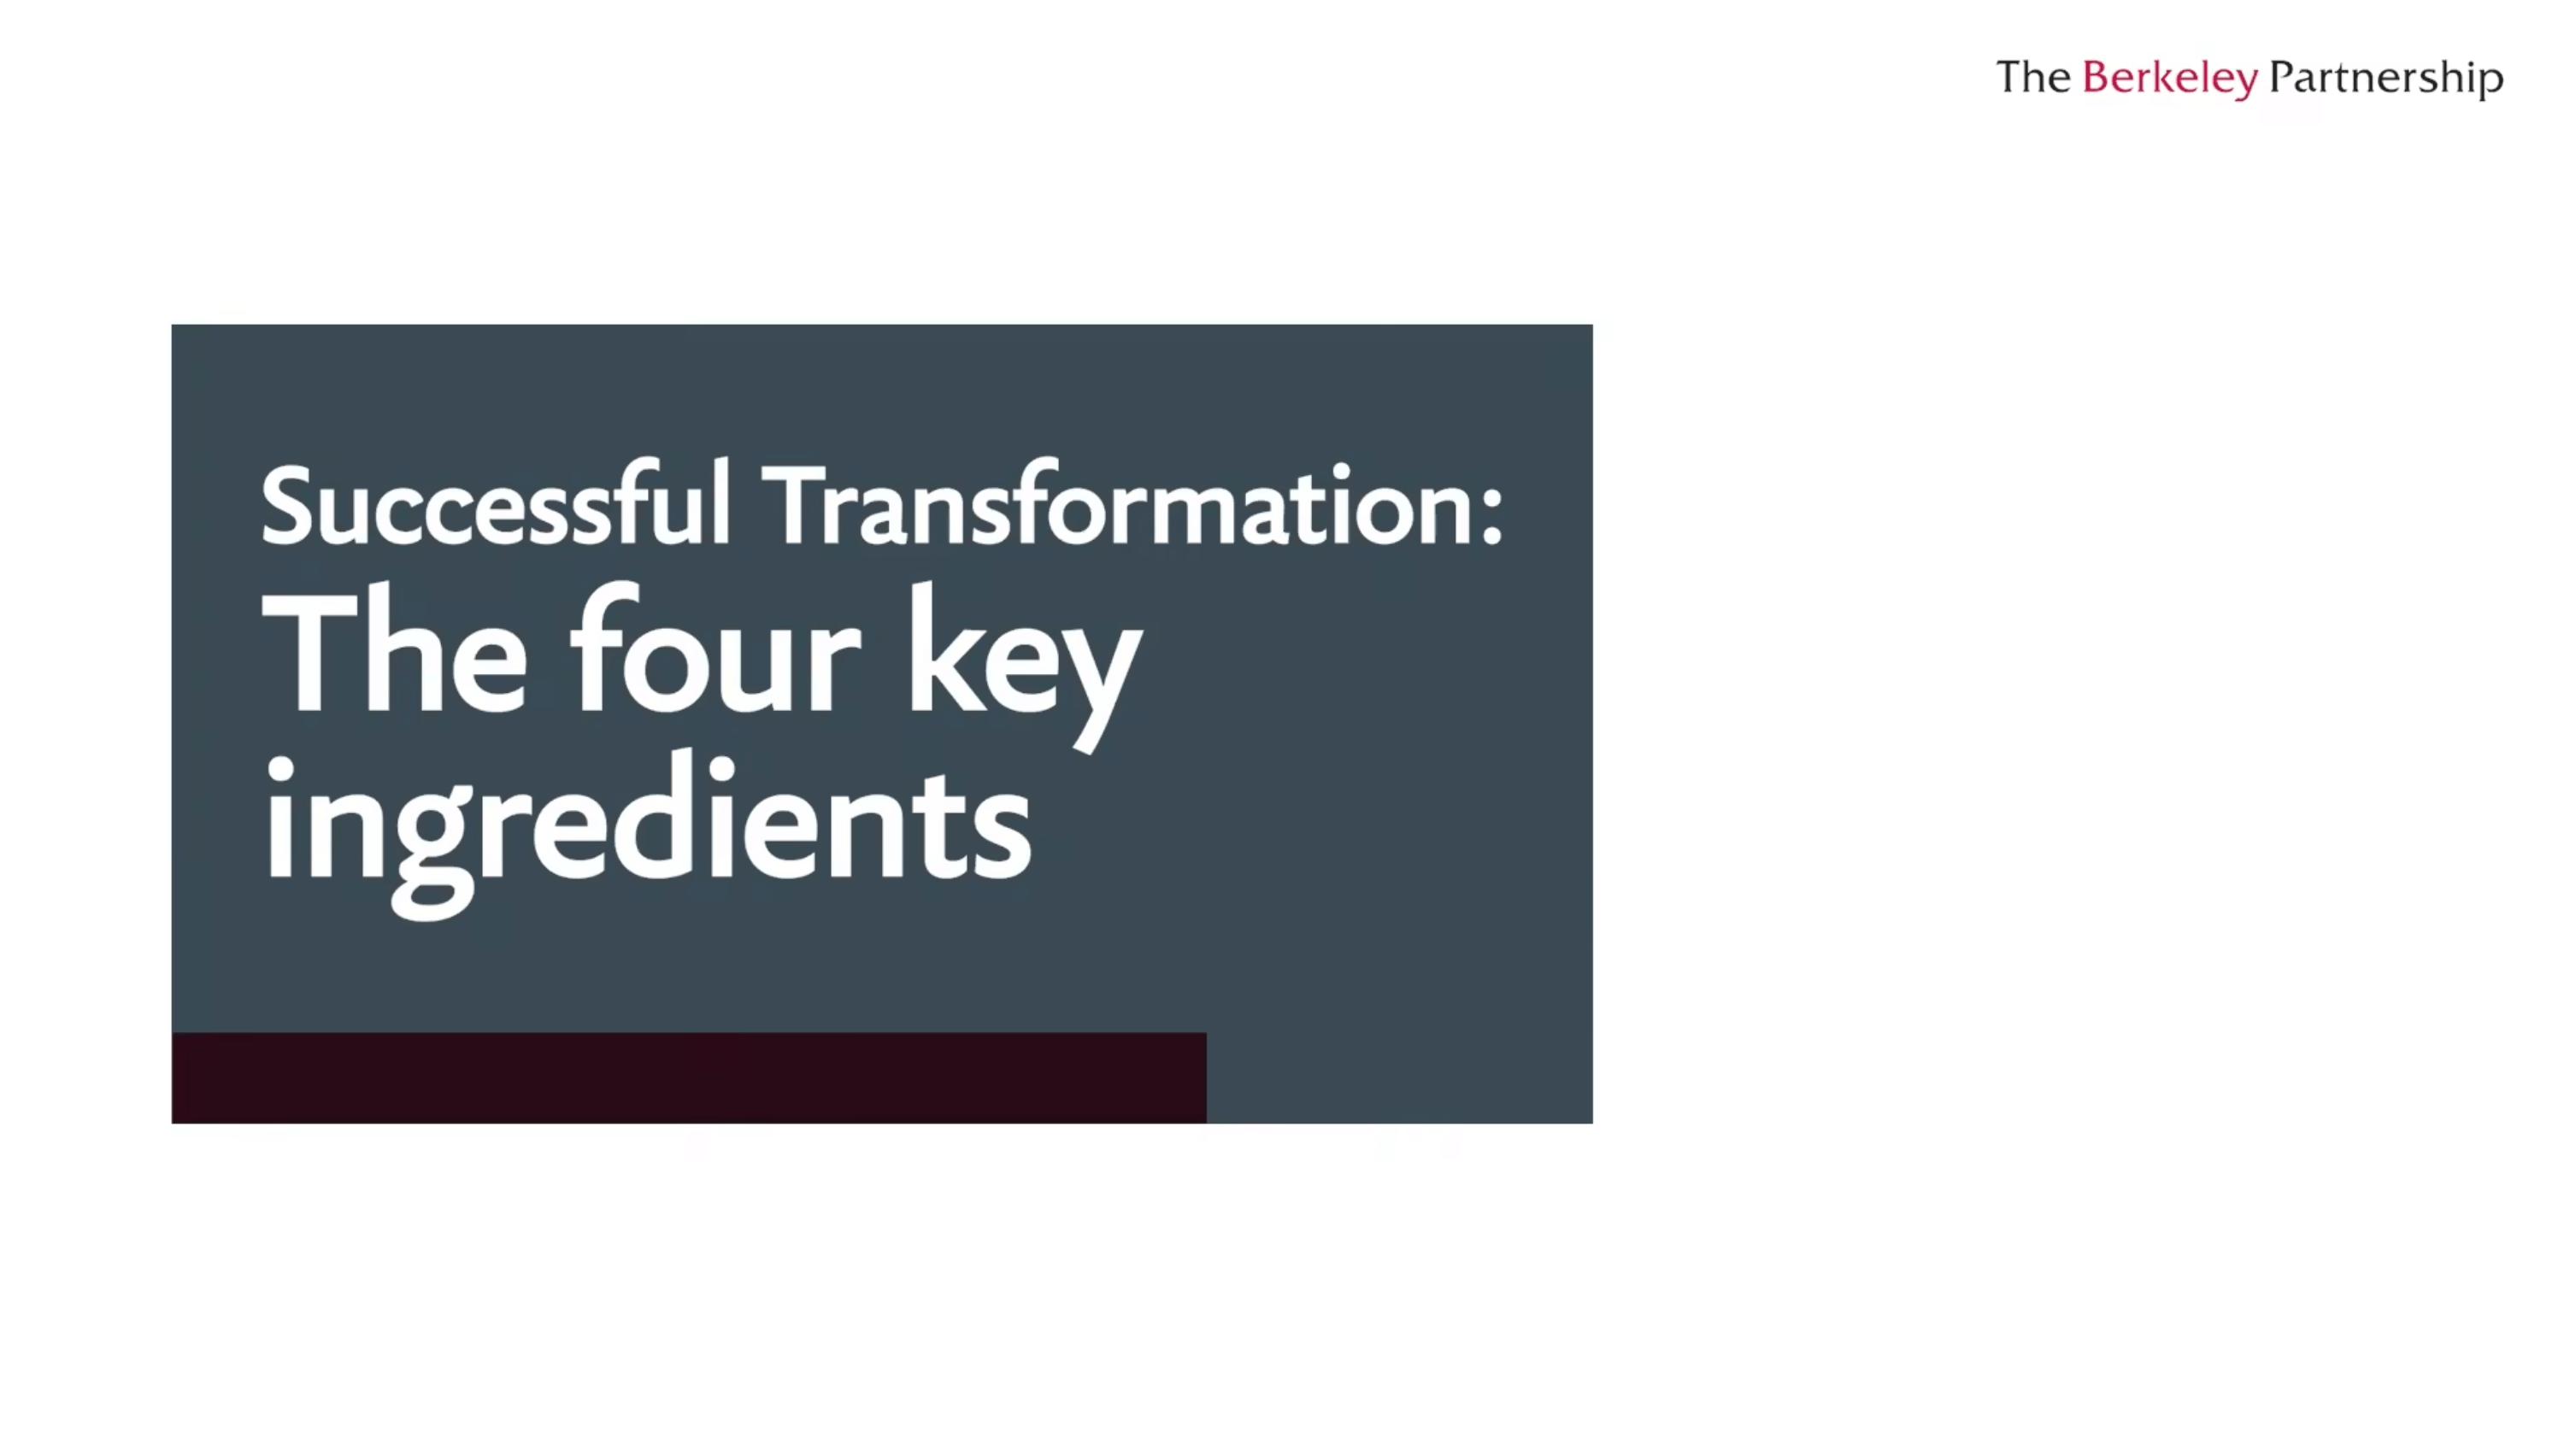 Successful transformation: The four key ingredients